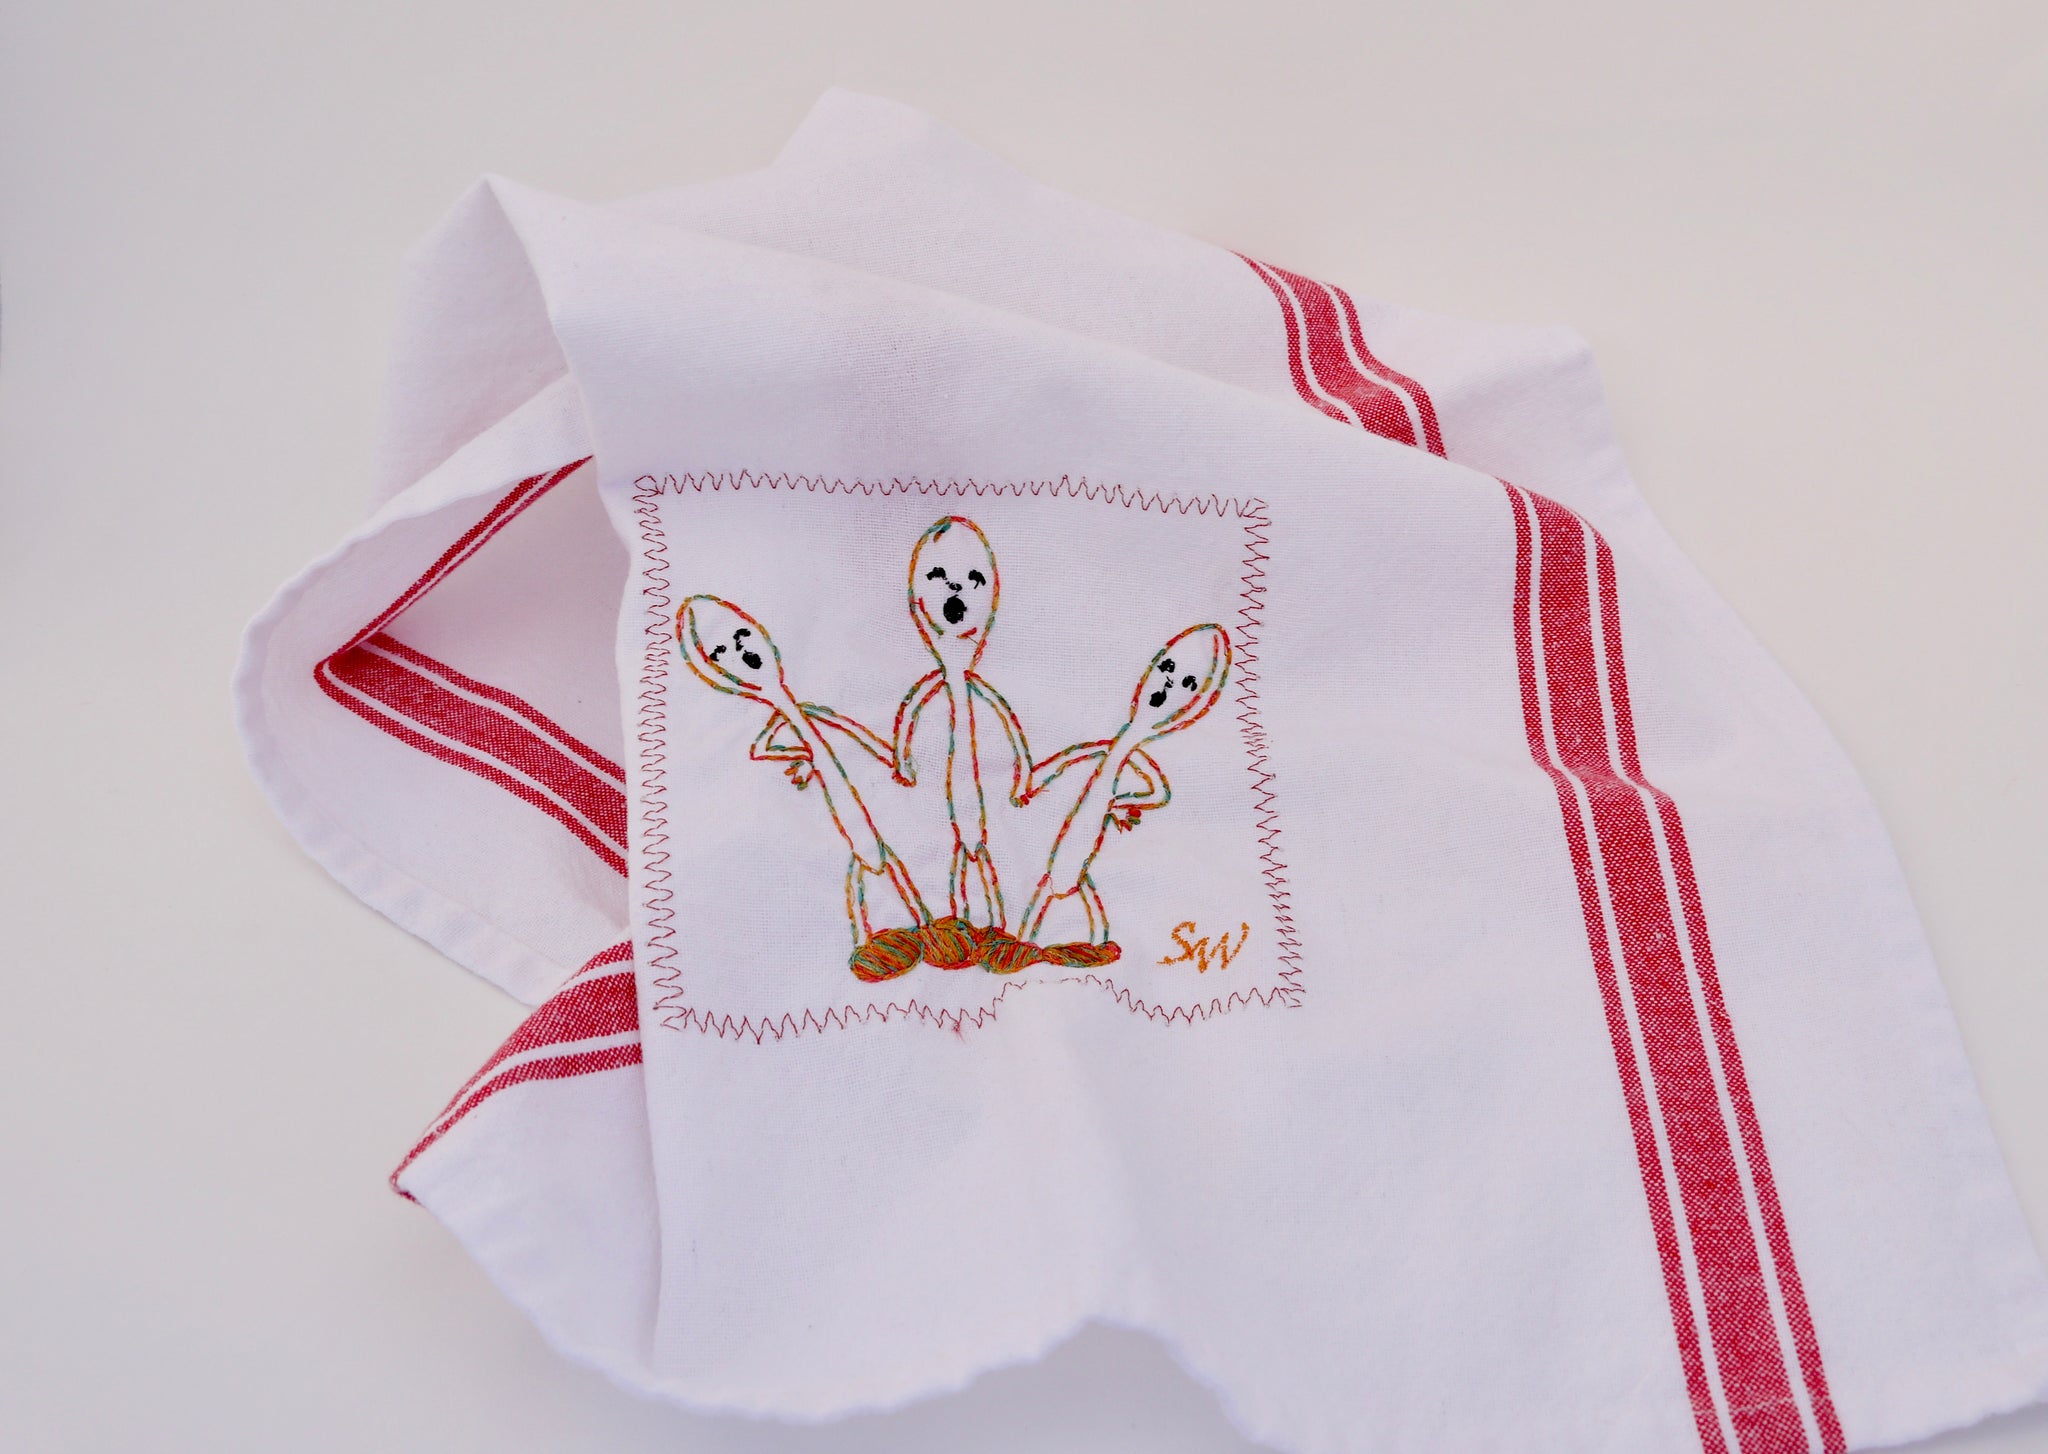 Vintage Embroidered Flour Sack Towels - The House on Silverado